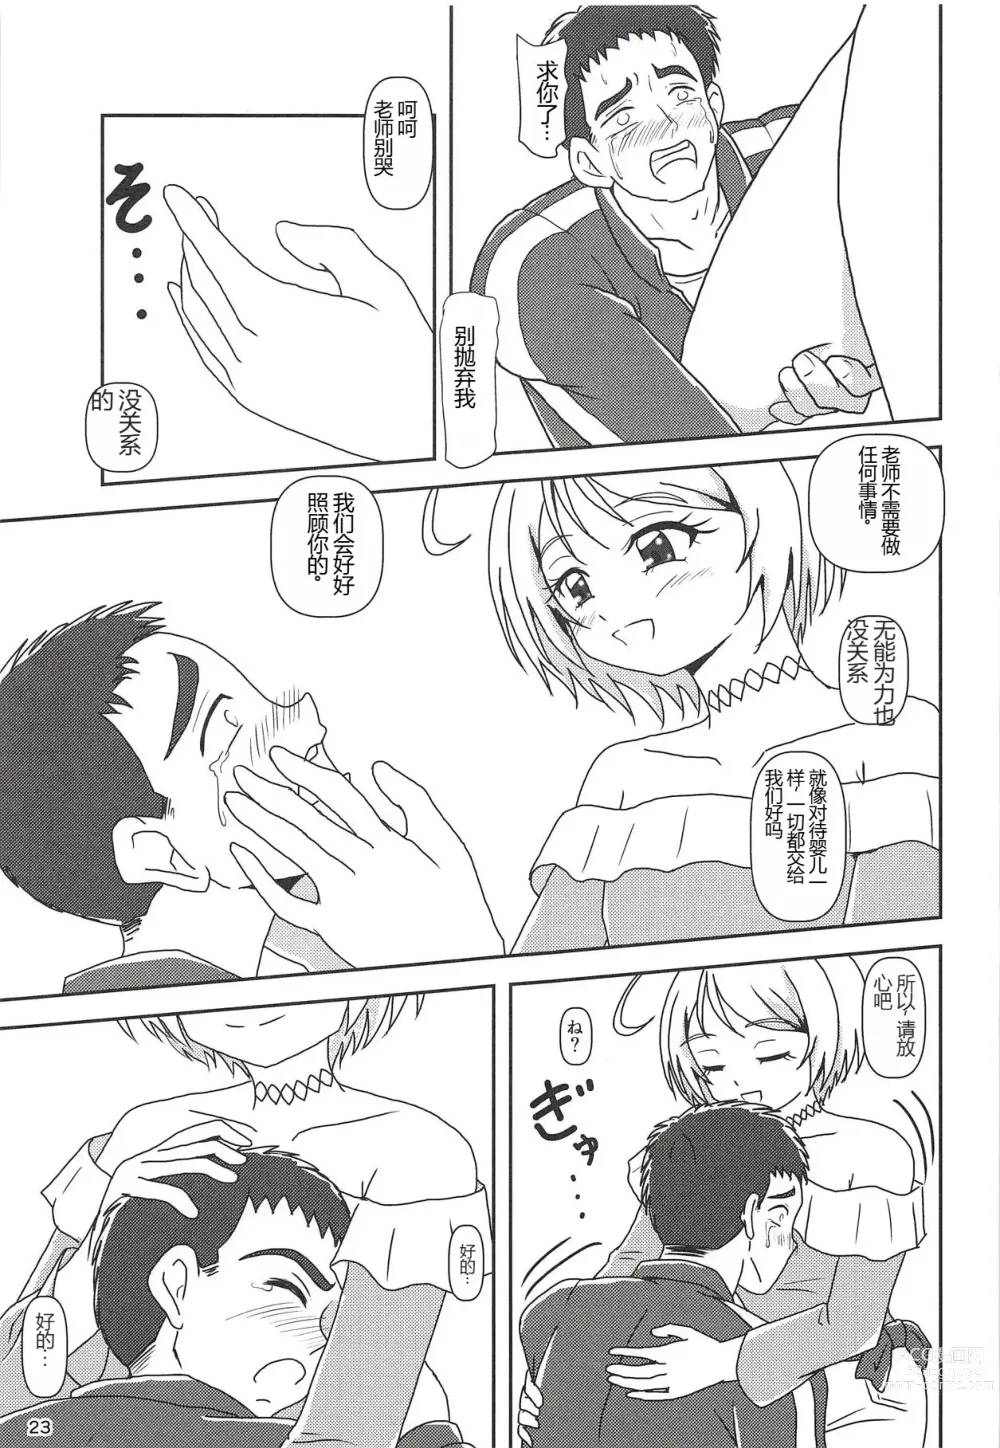 Page 22 of doujinshi Hugtto! Zuricure